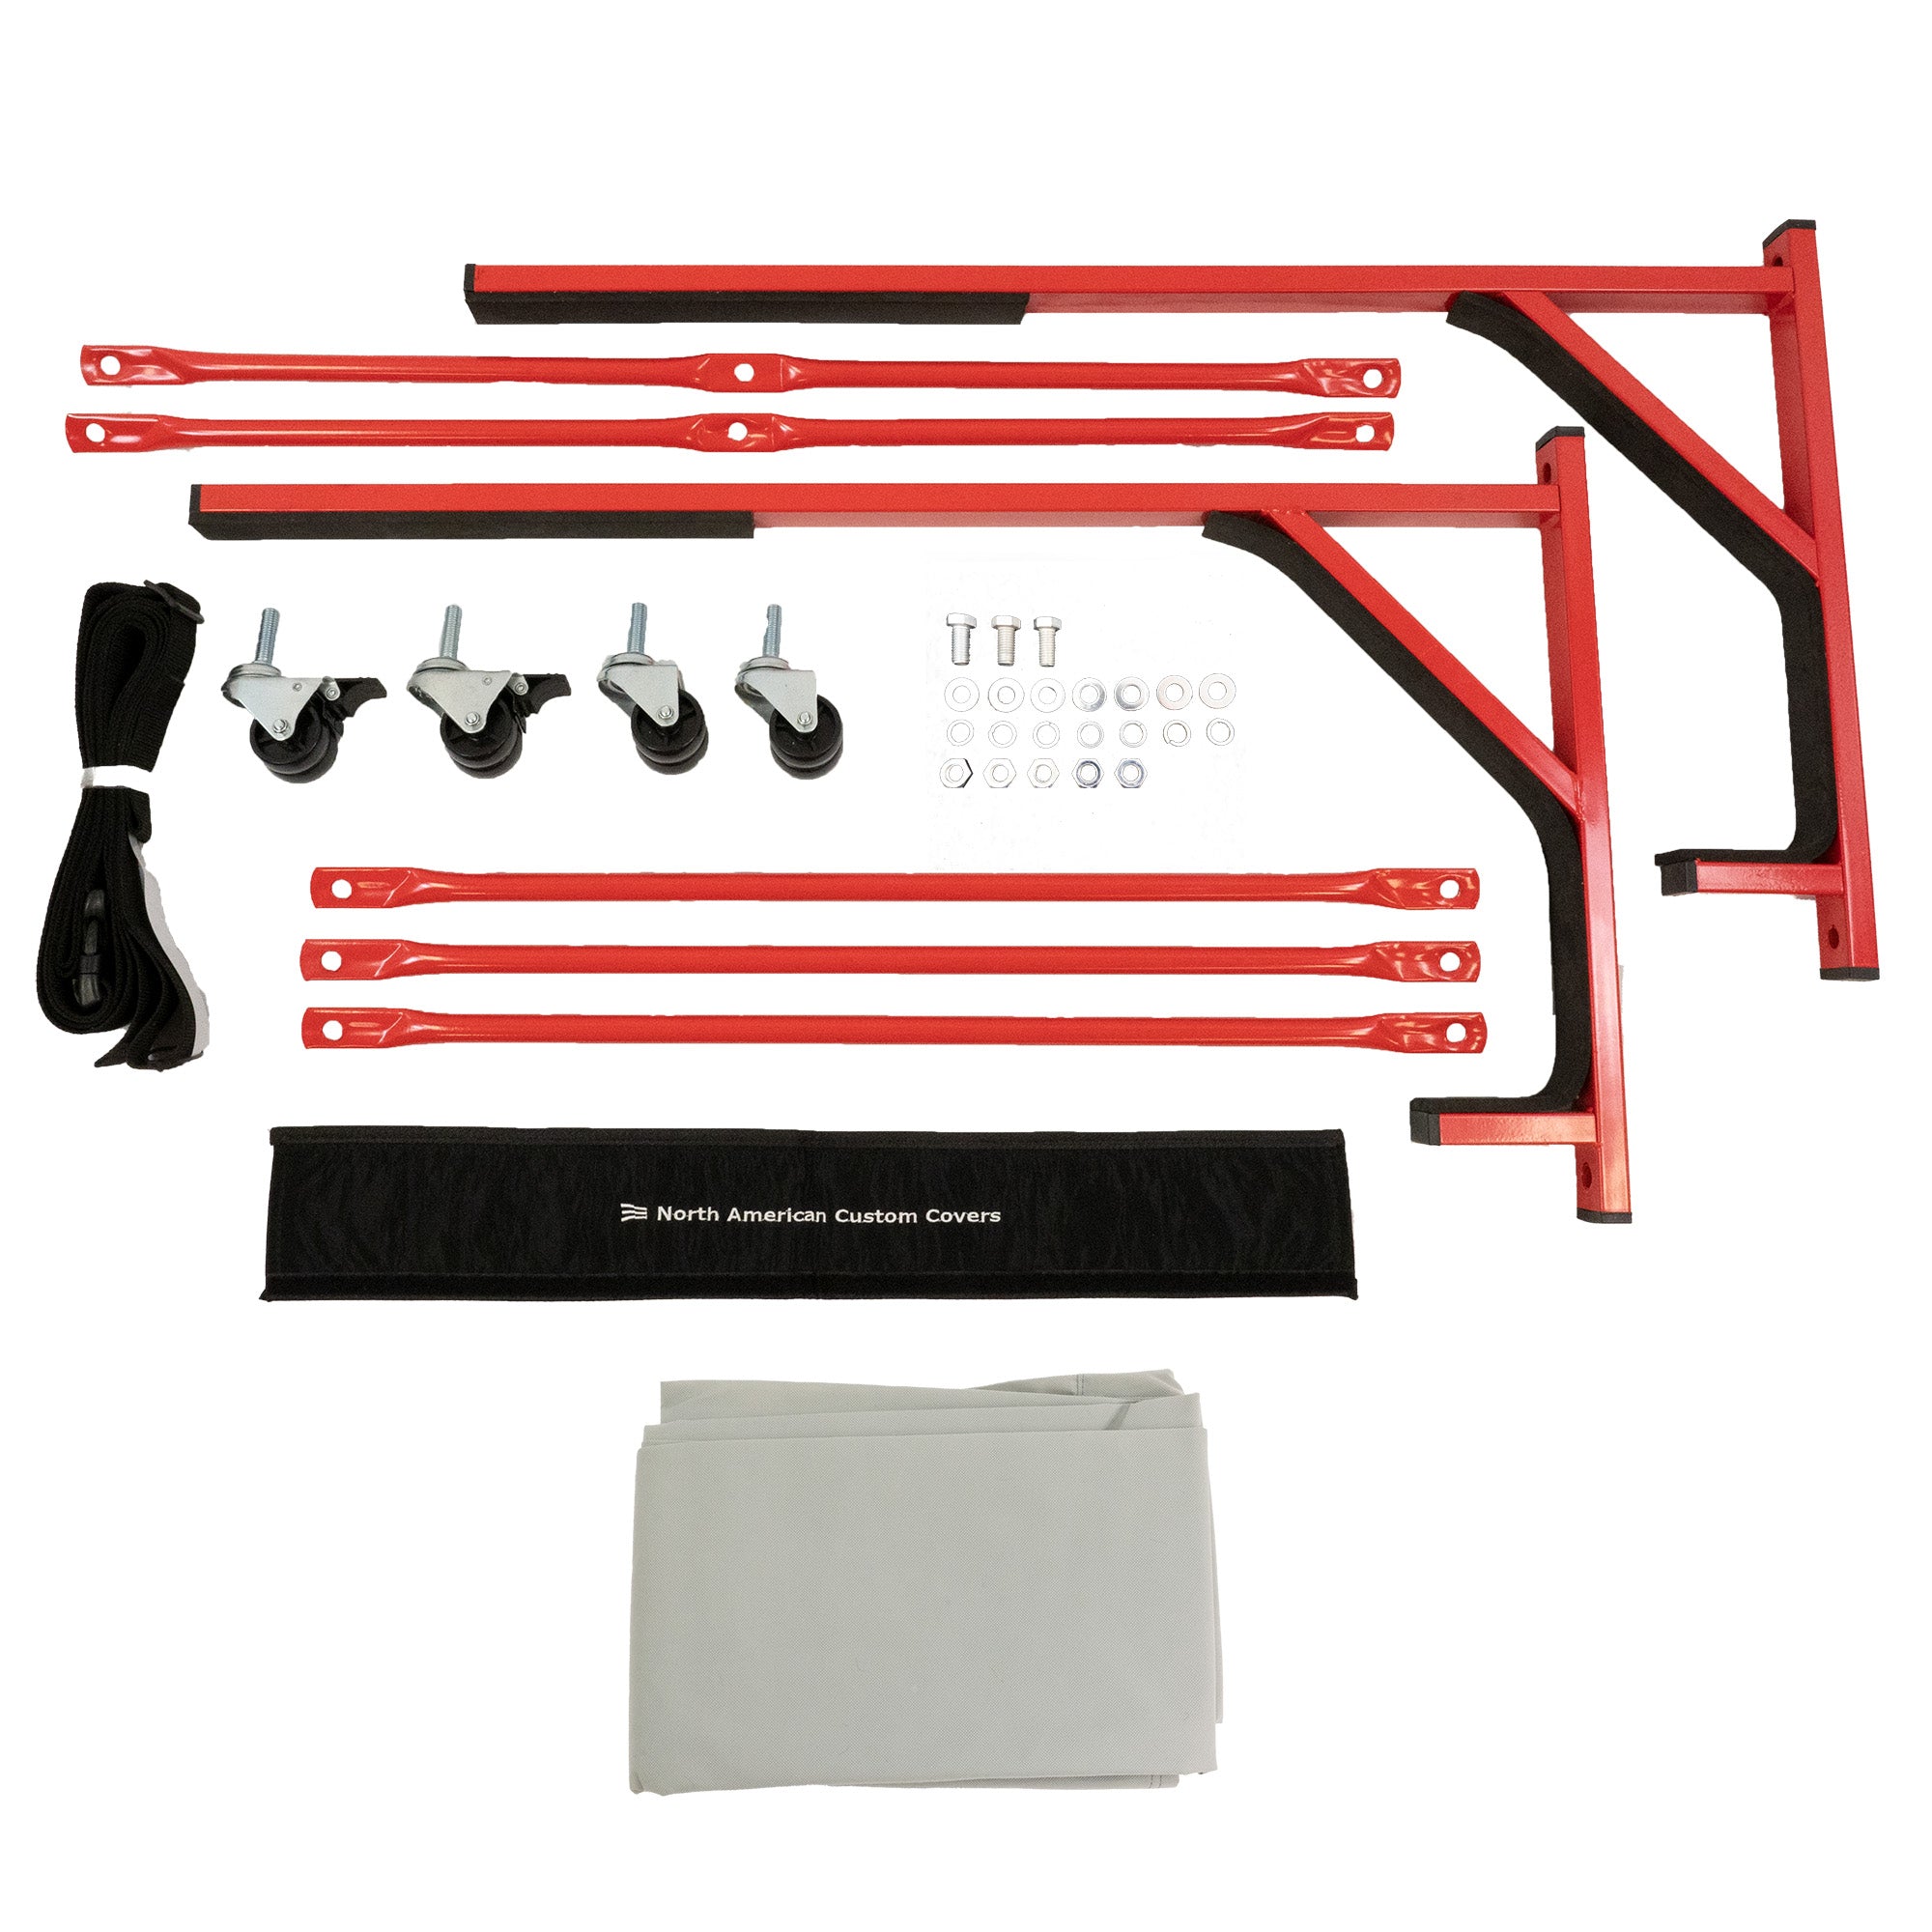 Porsche Boxster 986 Heavy-duty Hardtop Stand Trolley Cart Rack (Red) with Securing Harness and Hard Top Dust Cover (050R)